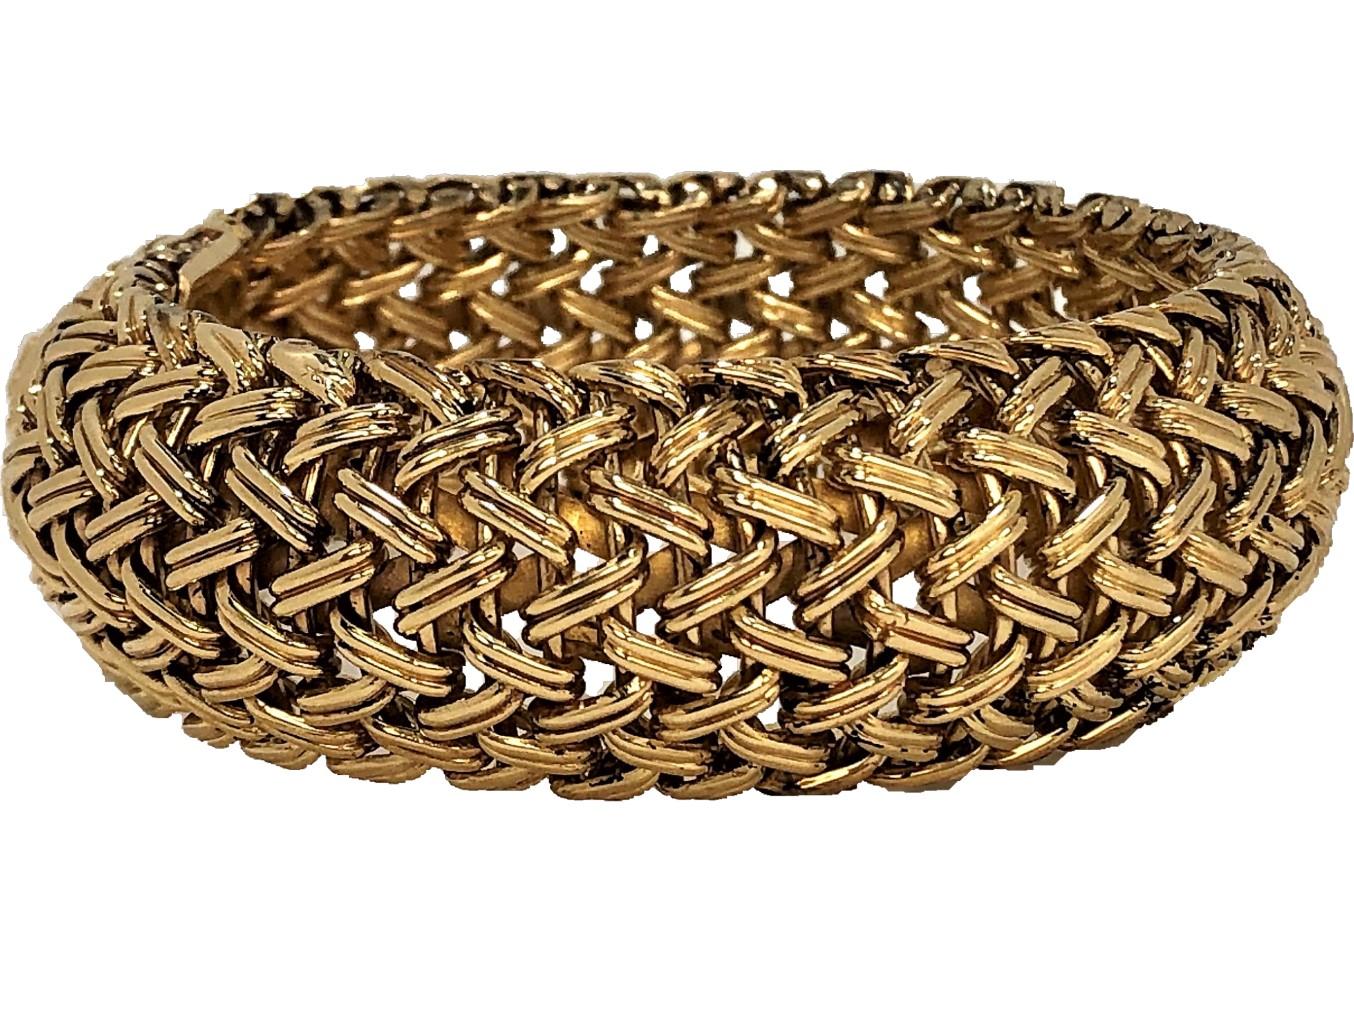 A smart looking, 14 karat gold Bombe bracelet featuring a woven design. 
Measuring 7 1/2 inches long by 7/8 inch wide with a figure 8 safety clasp 
on one side.  Marked 14K. Gross weight 74.6 grams.